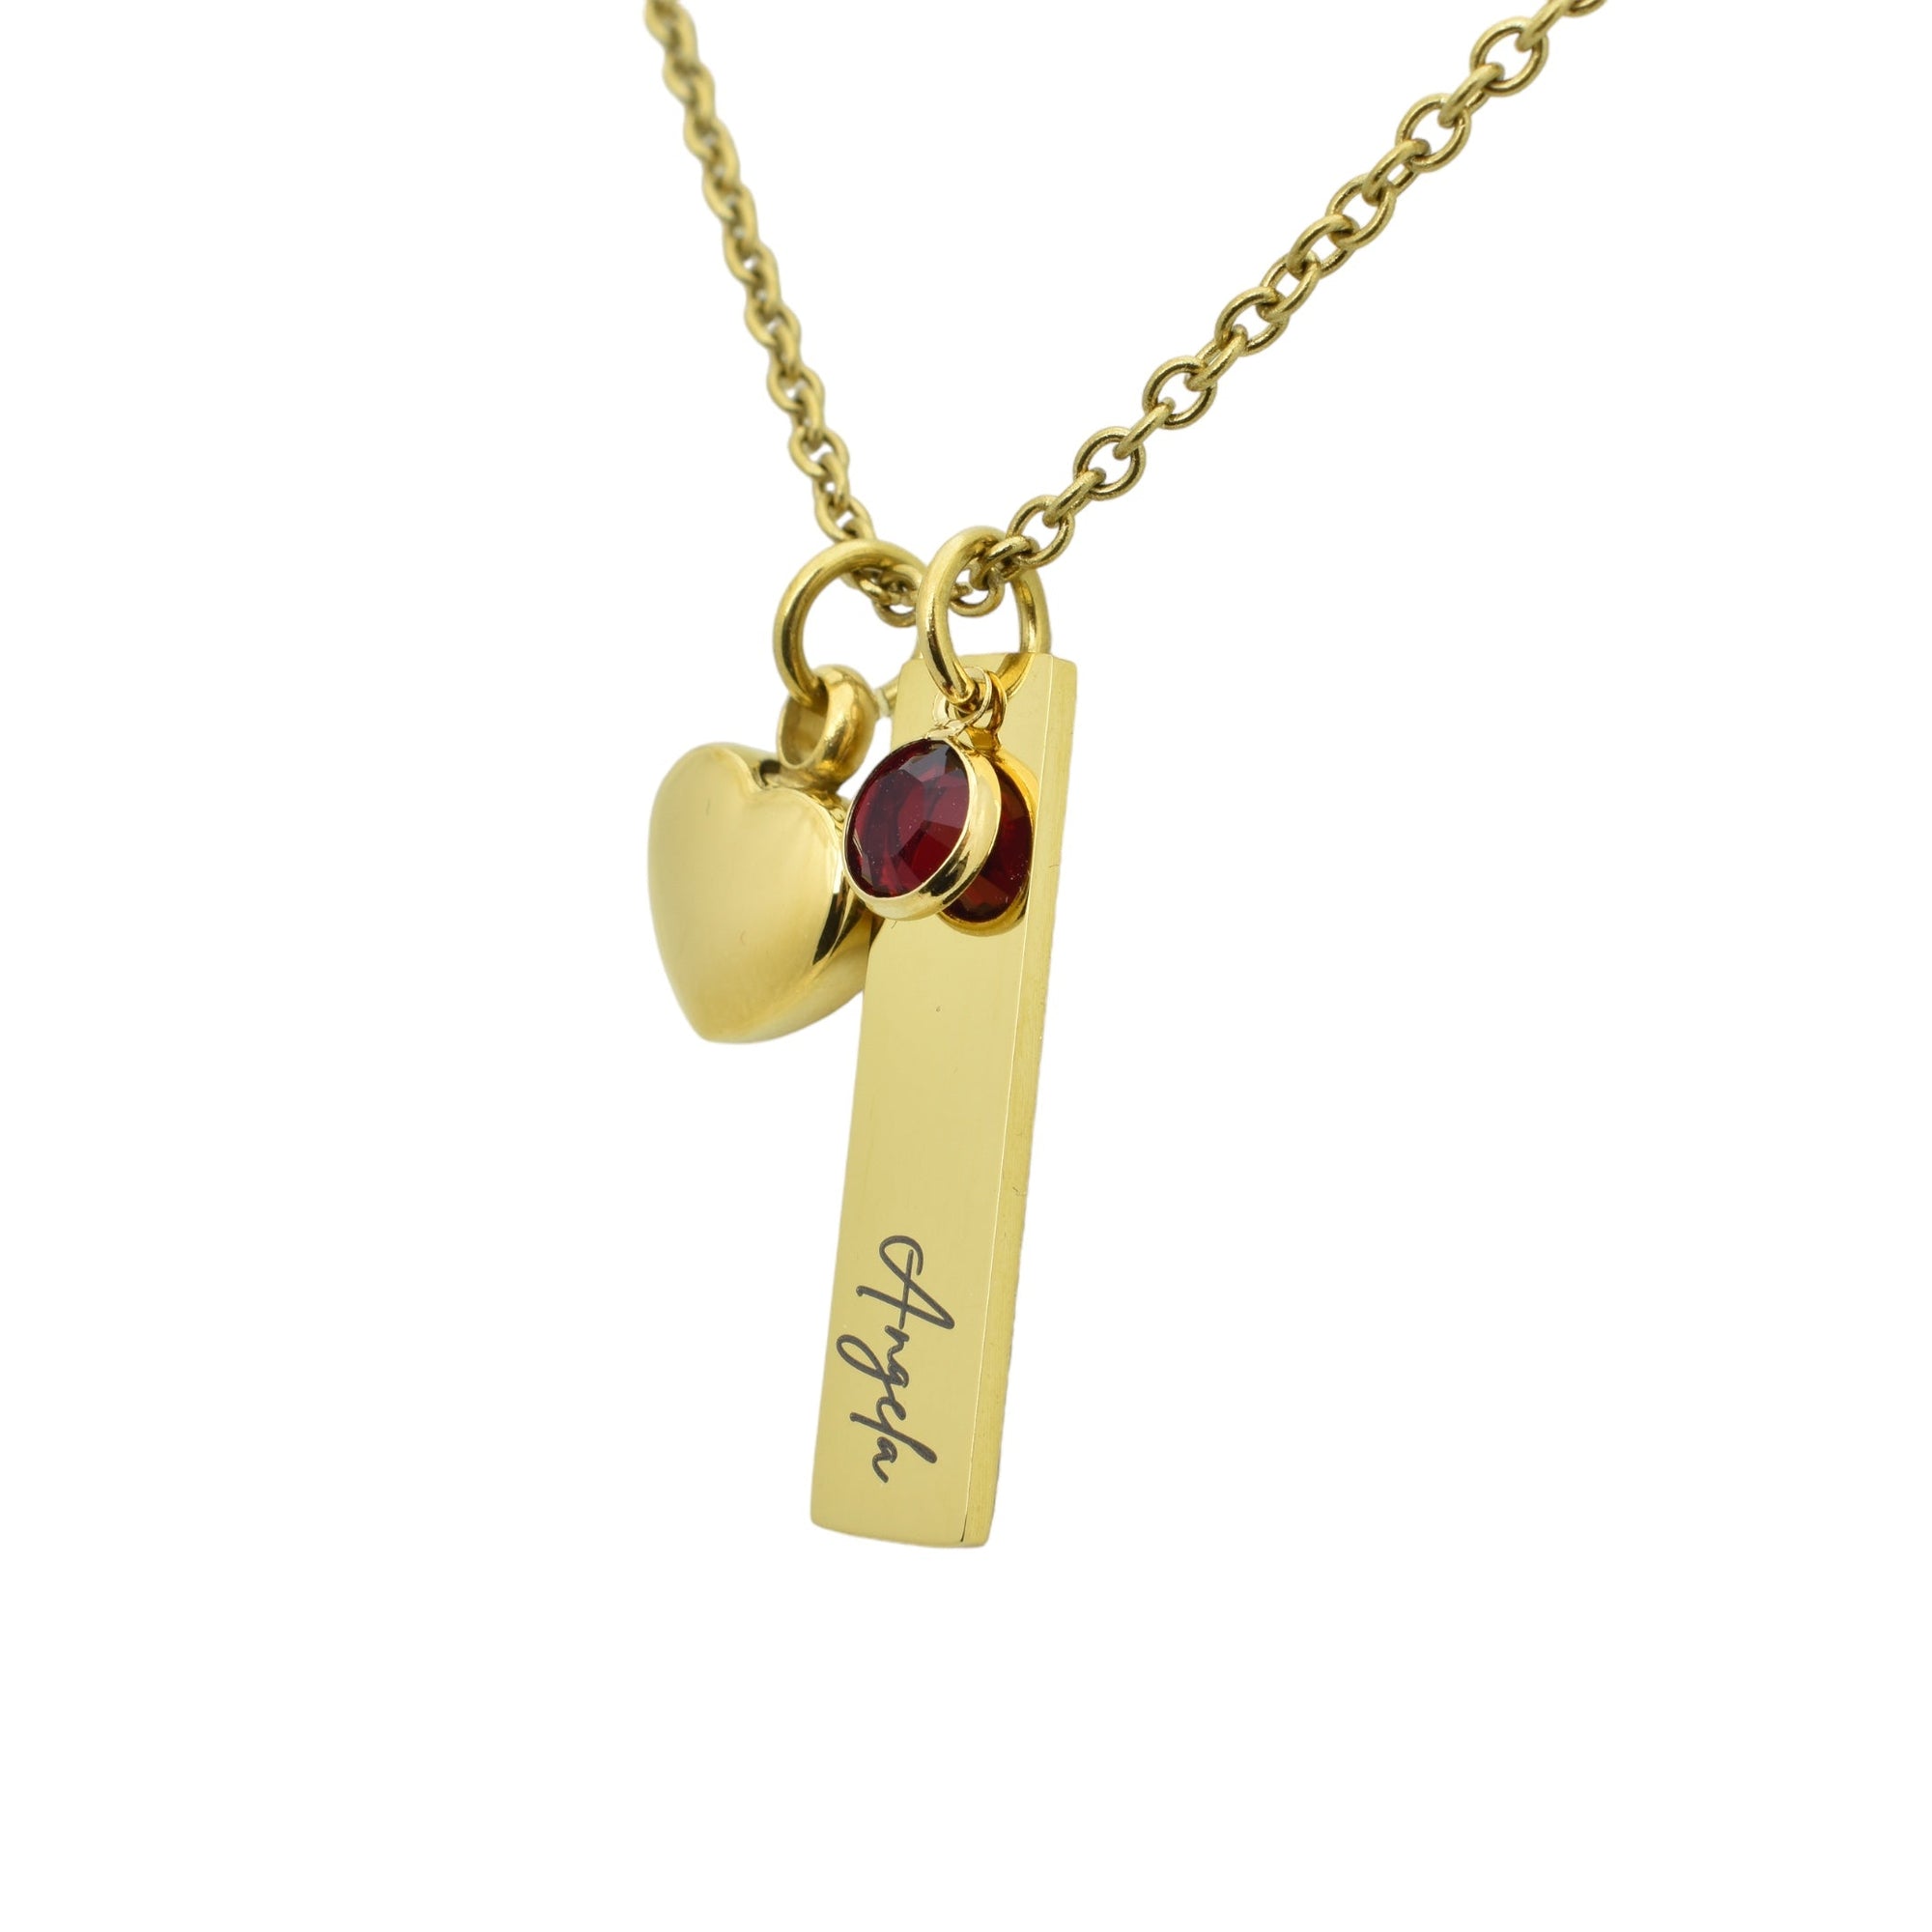 Personalized Birthstone Necklace for Mom